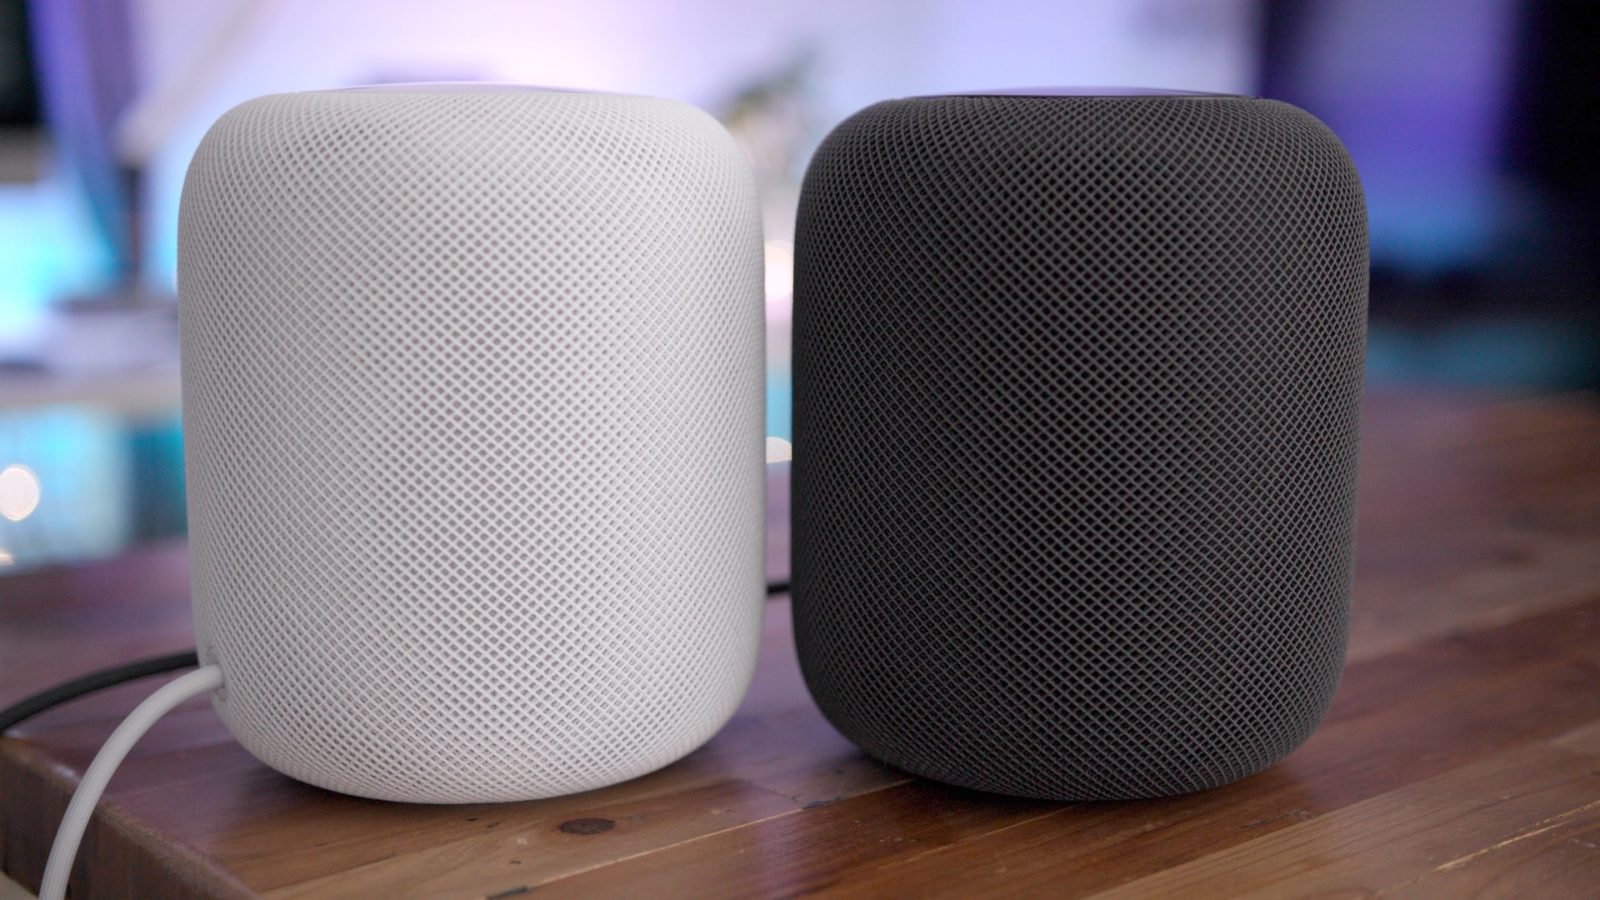 How to use HomePod as Apple TV default speakers